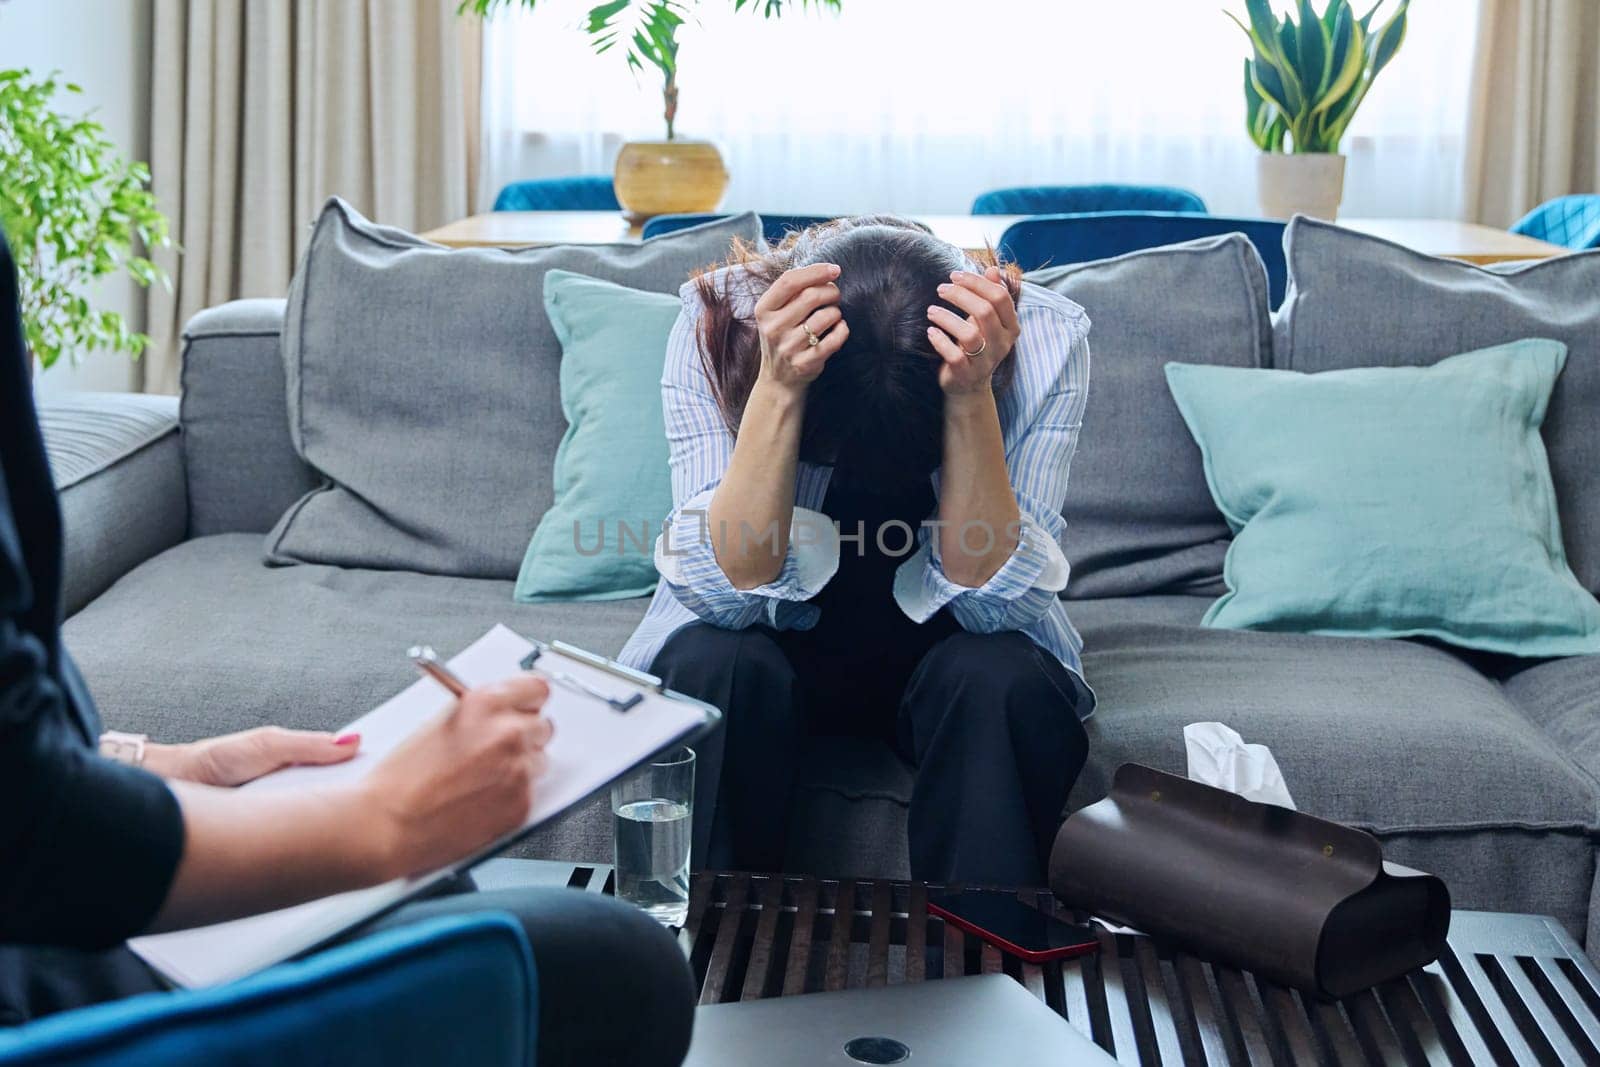 Sad upset crying middle-aged woman sitting on couch in therapy with psychologist counselor therapist. Psychology, psychotherapy, mental health, professional support, treatment, mature people concept